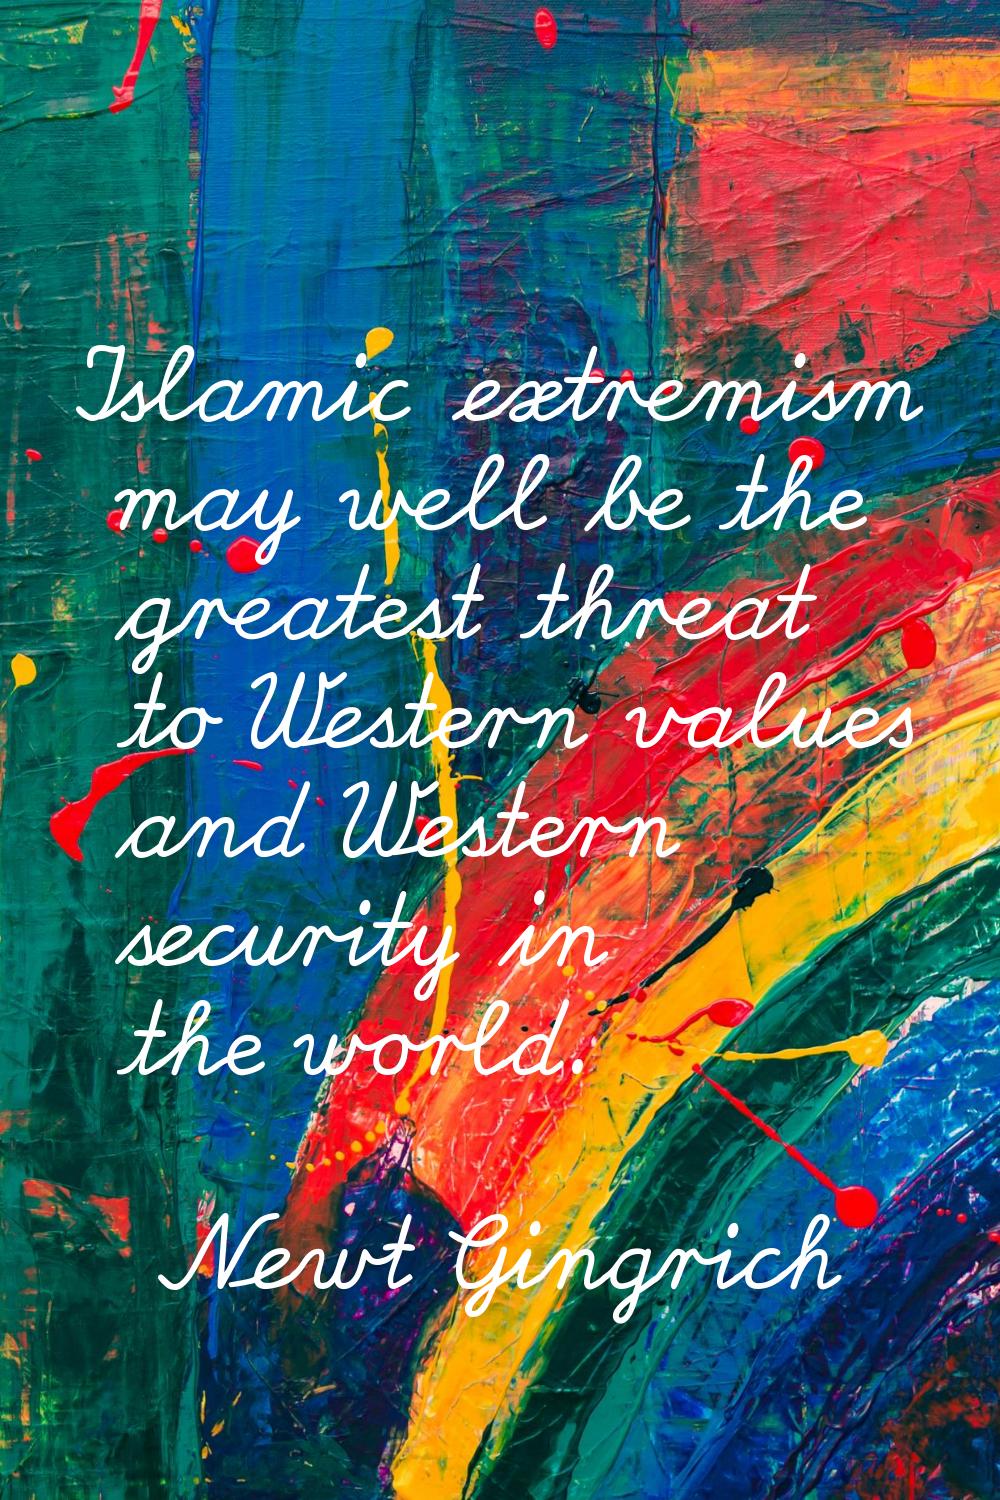 Islamic extremism may well be the greatest threat to Western values and Western security in the wor